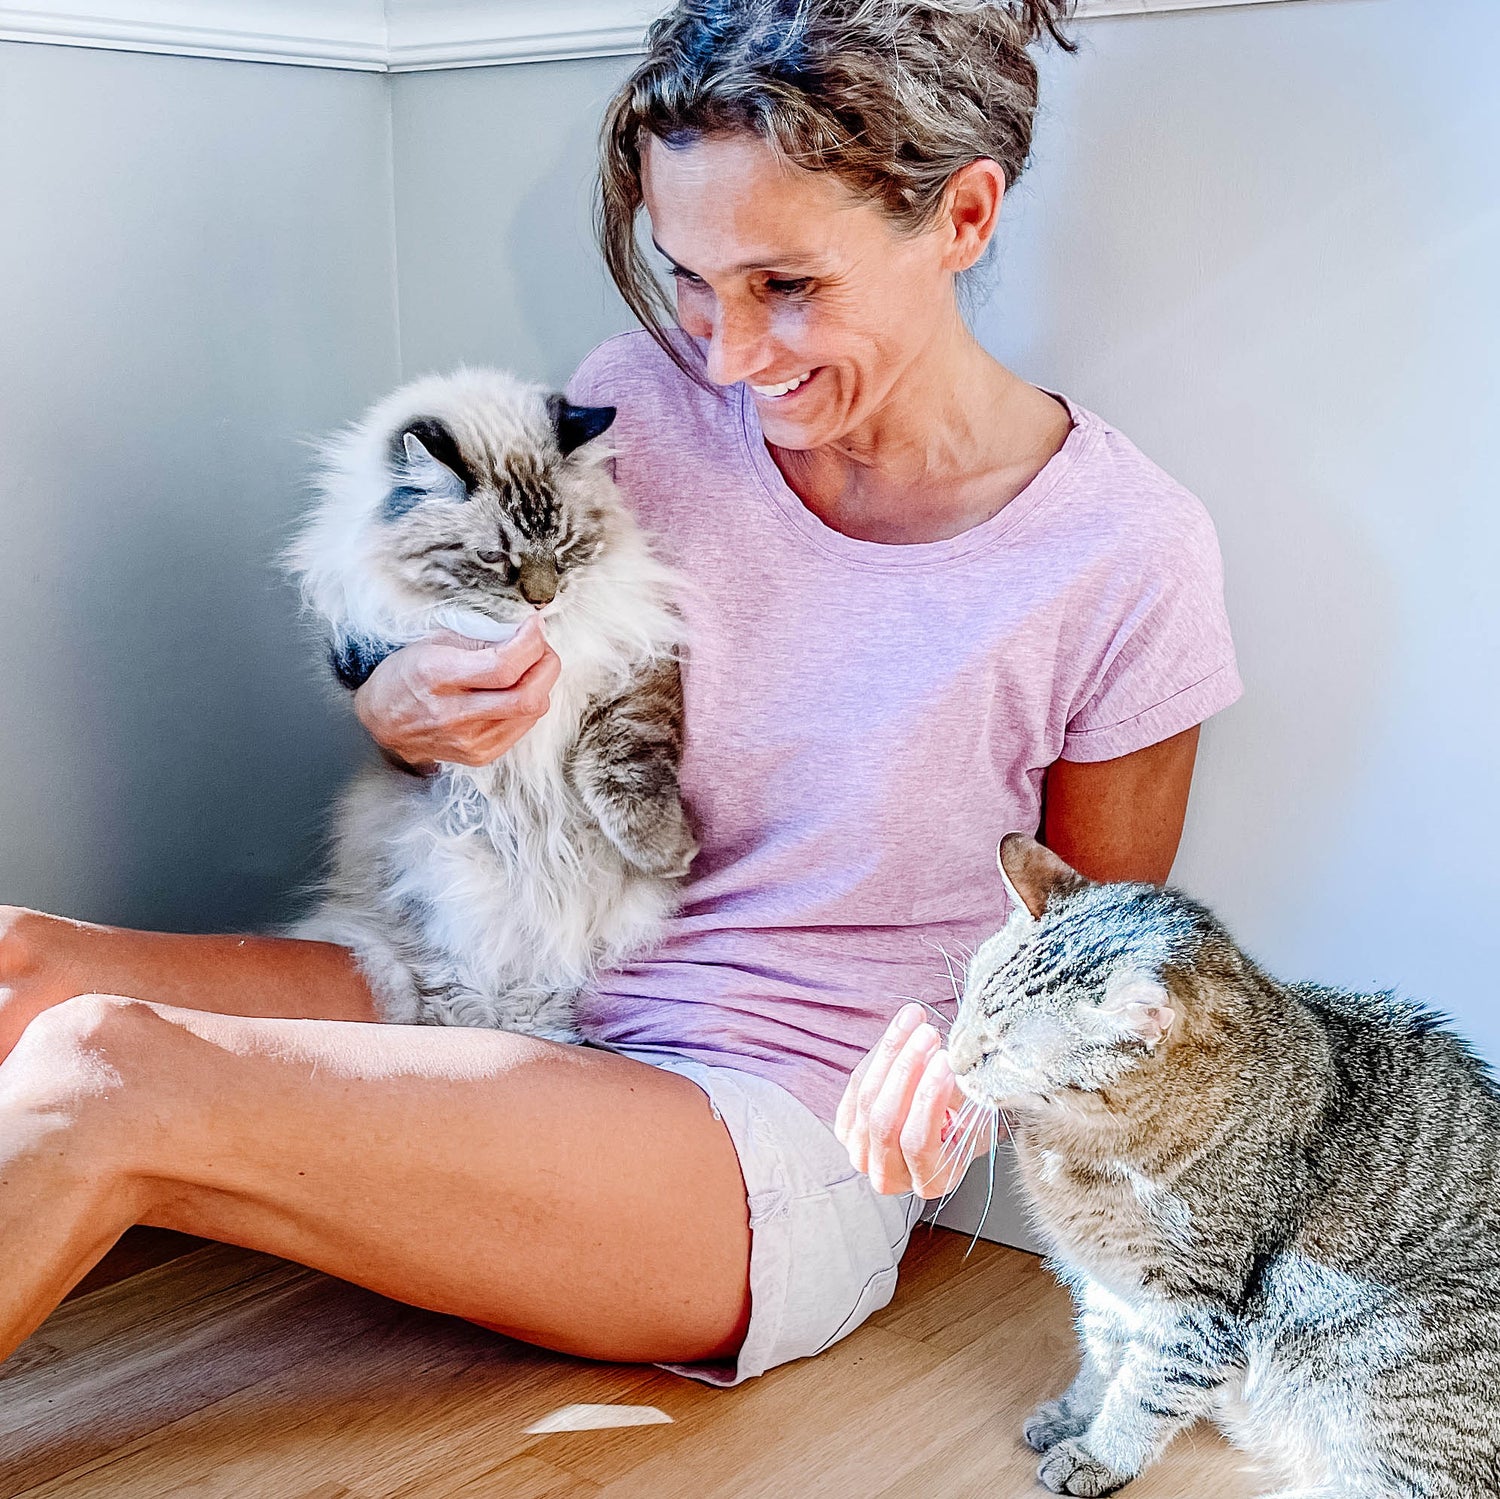 angela-staehling-petting-cats